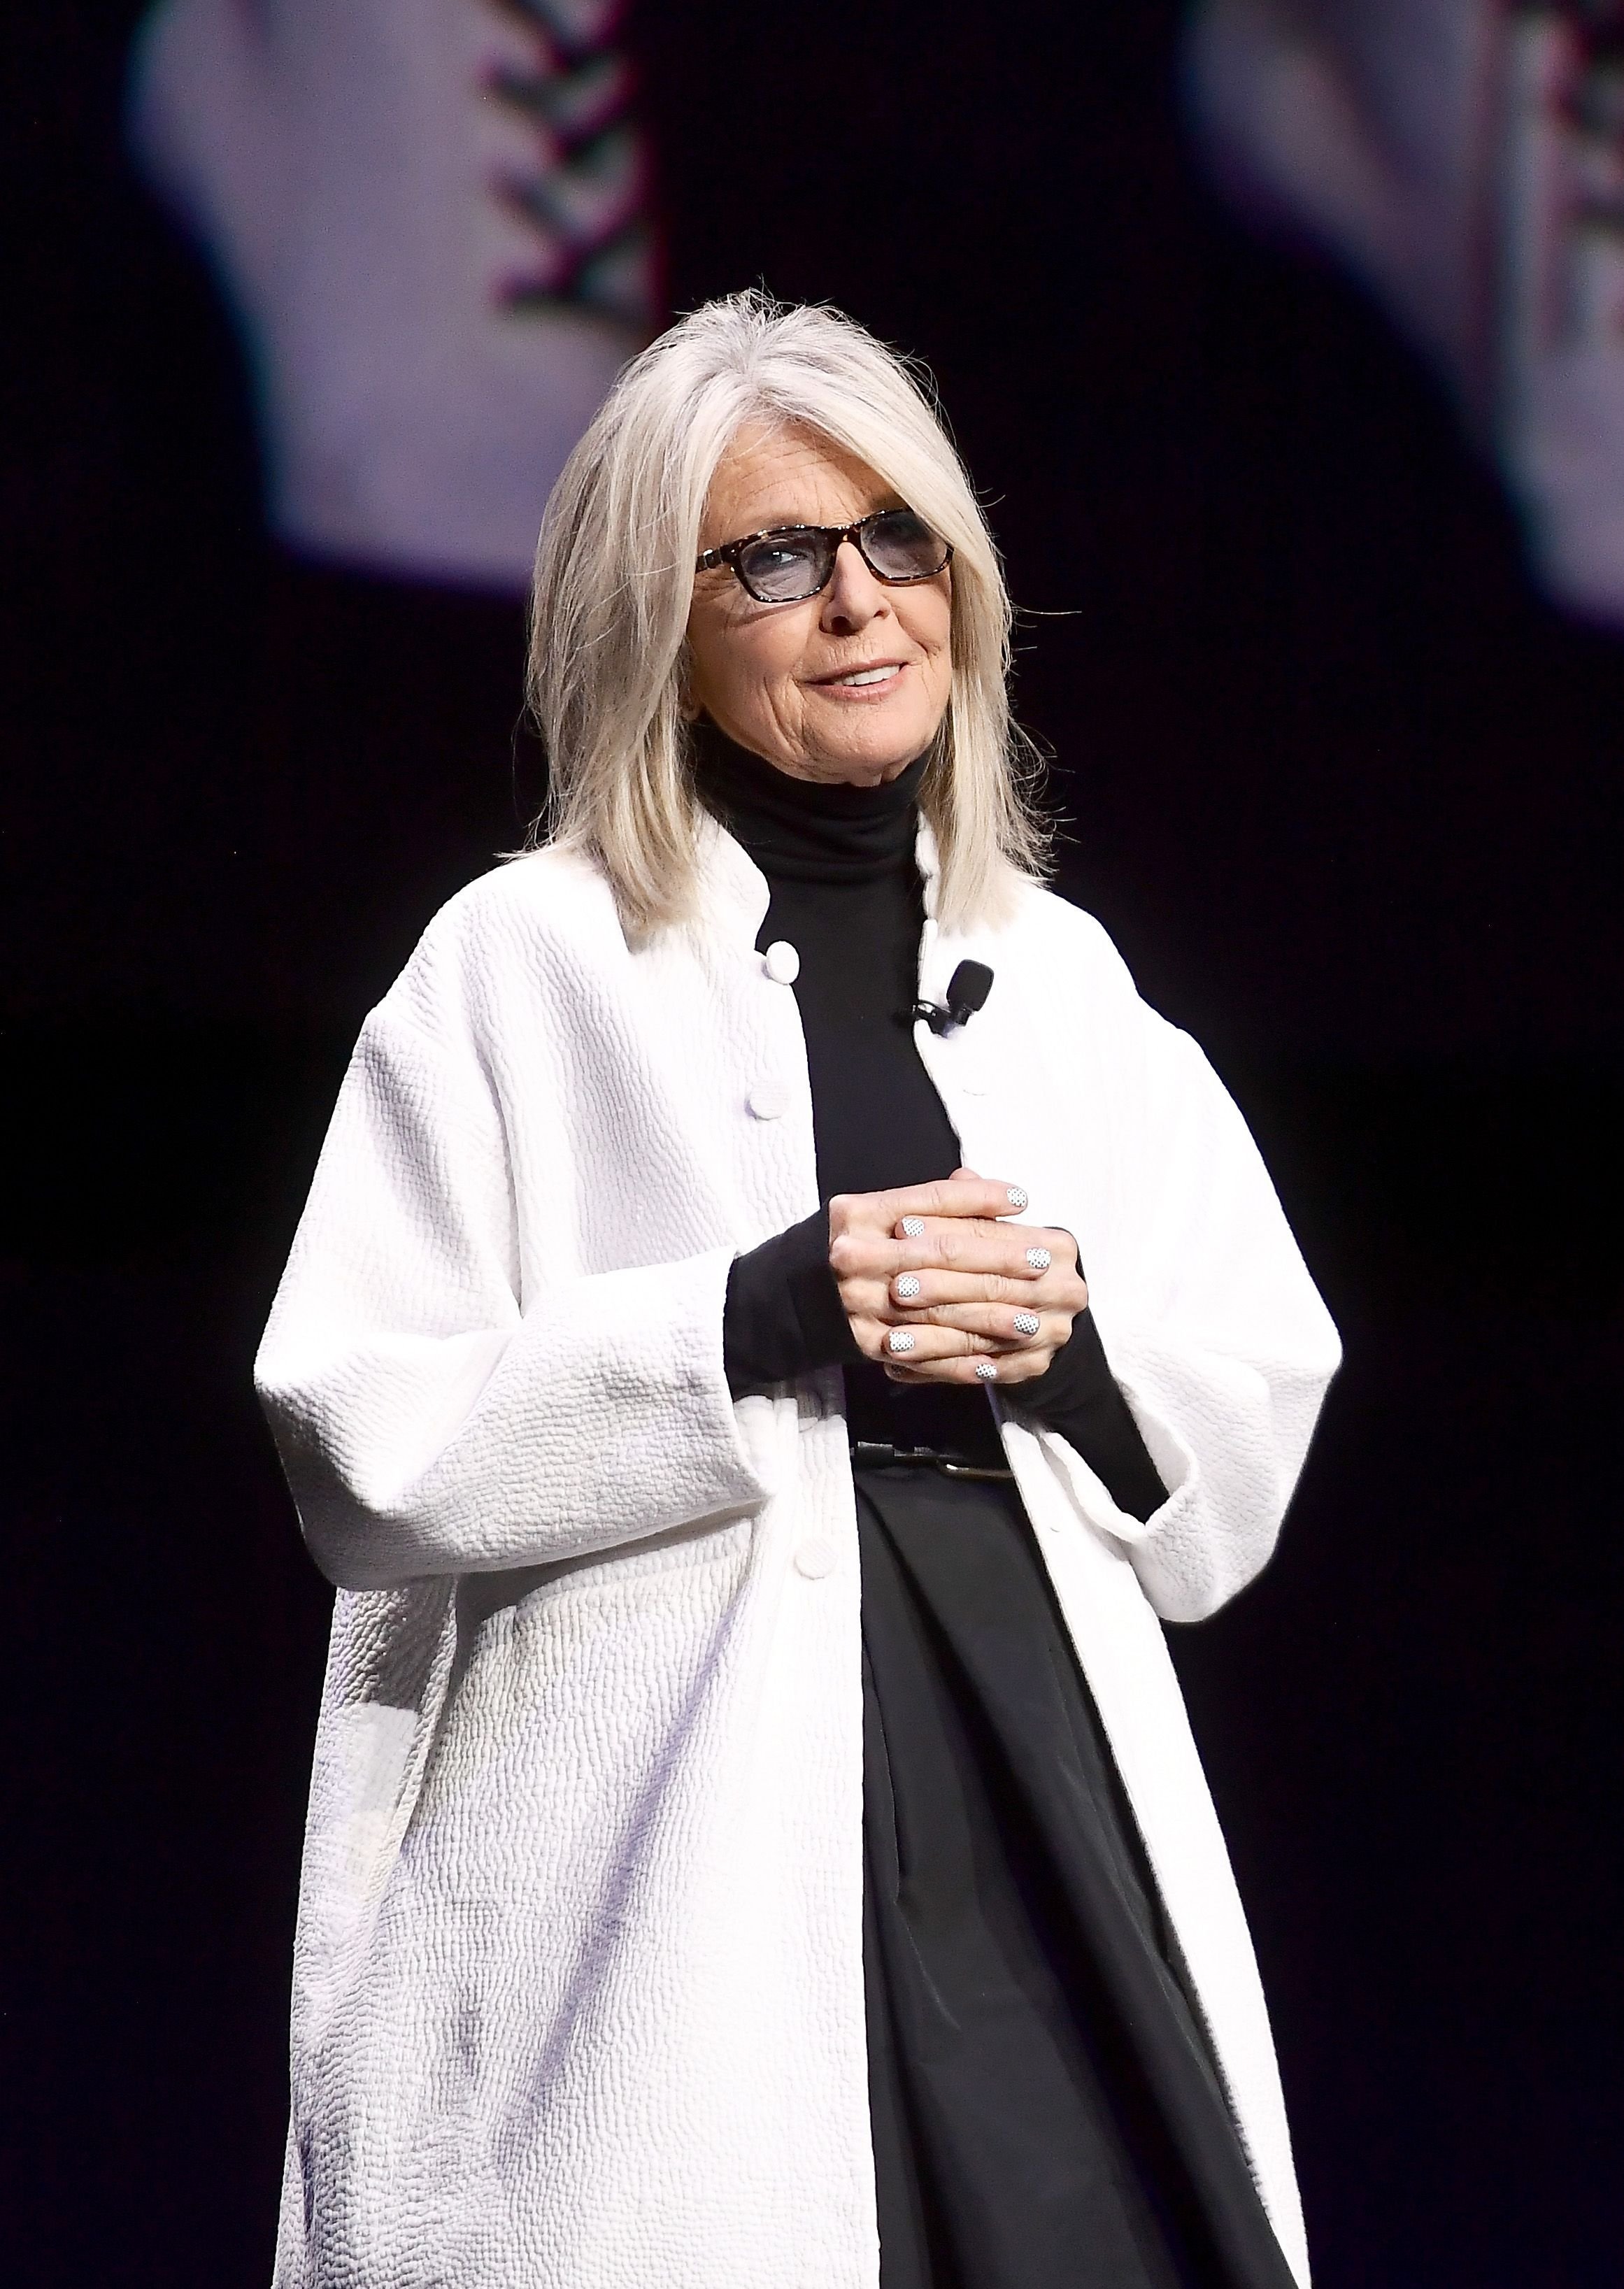 Diane Keaton speaks onstage at CinemaCon 2019 The State of the Industry and STXfilms Presentation. | Source: Getty Images